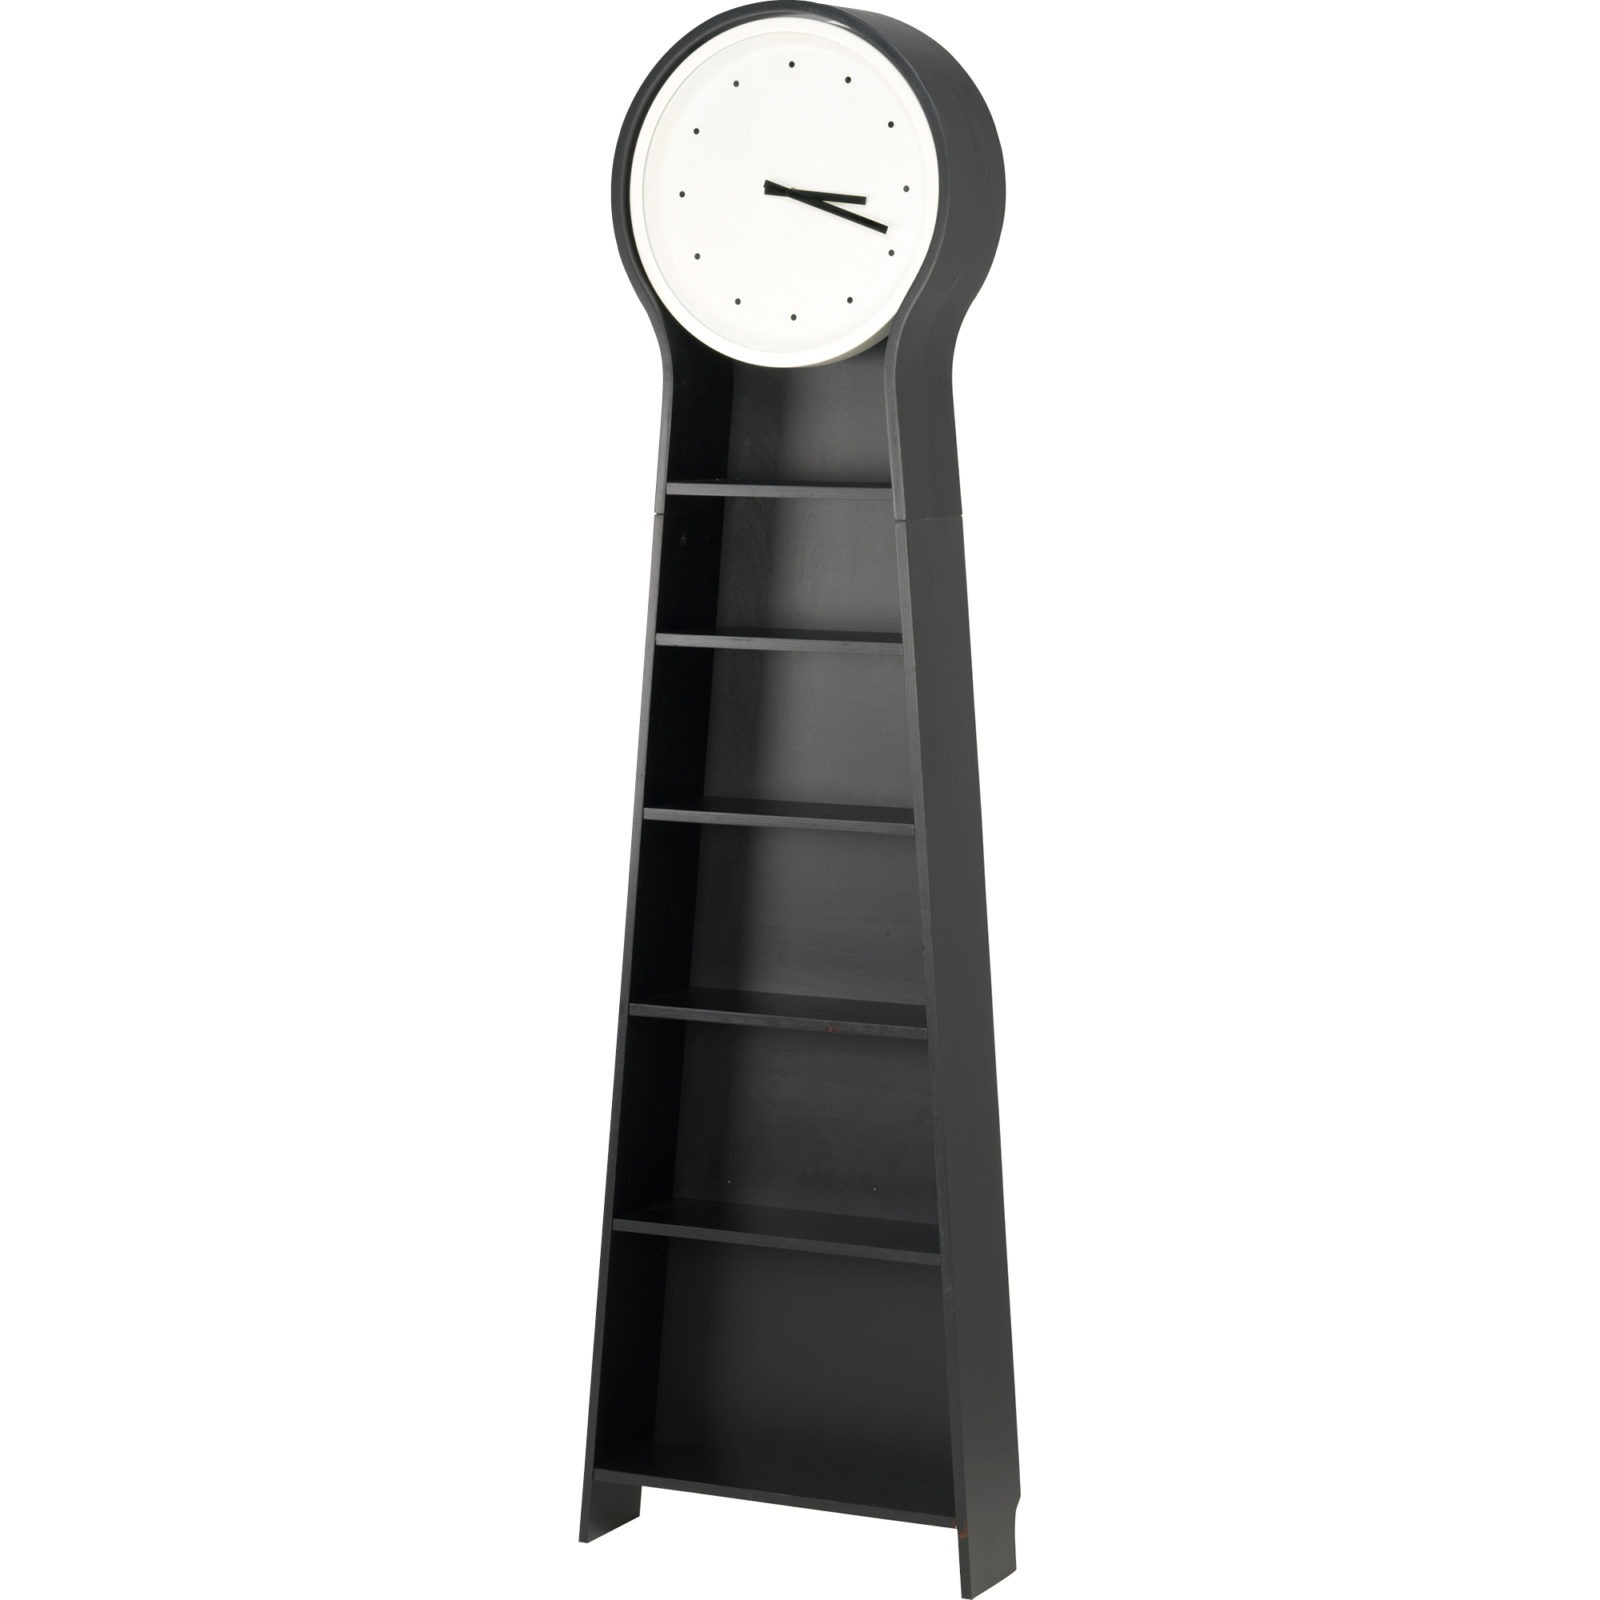 Black floor clock with shelving for storage, made of glue-layered, moulded poplar veneer.